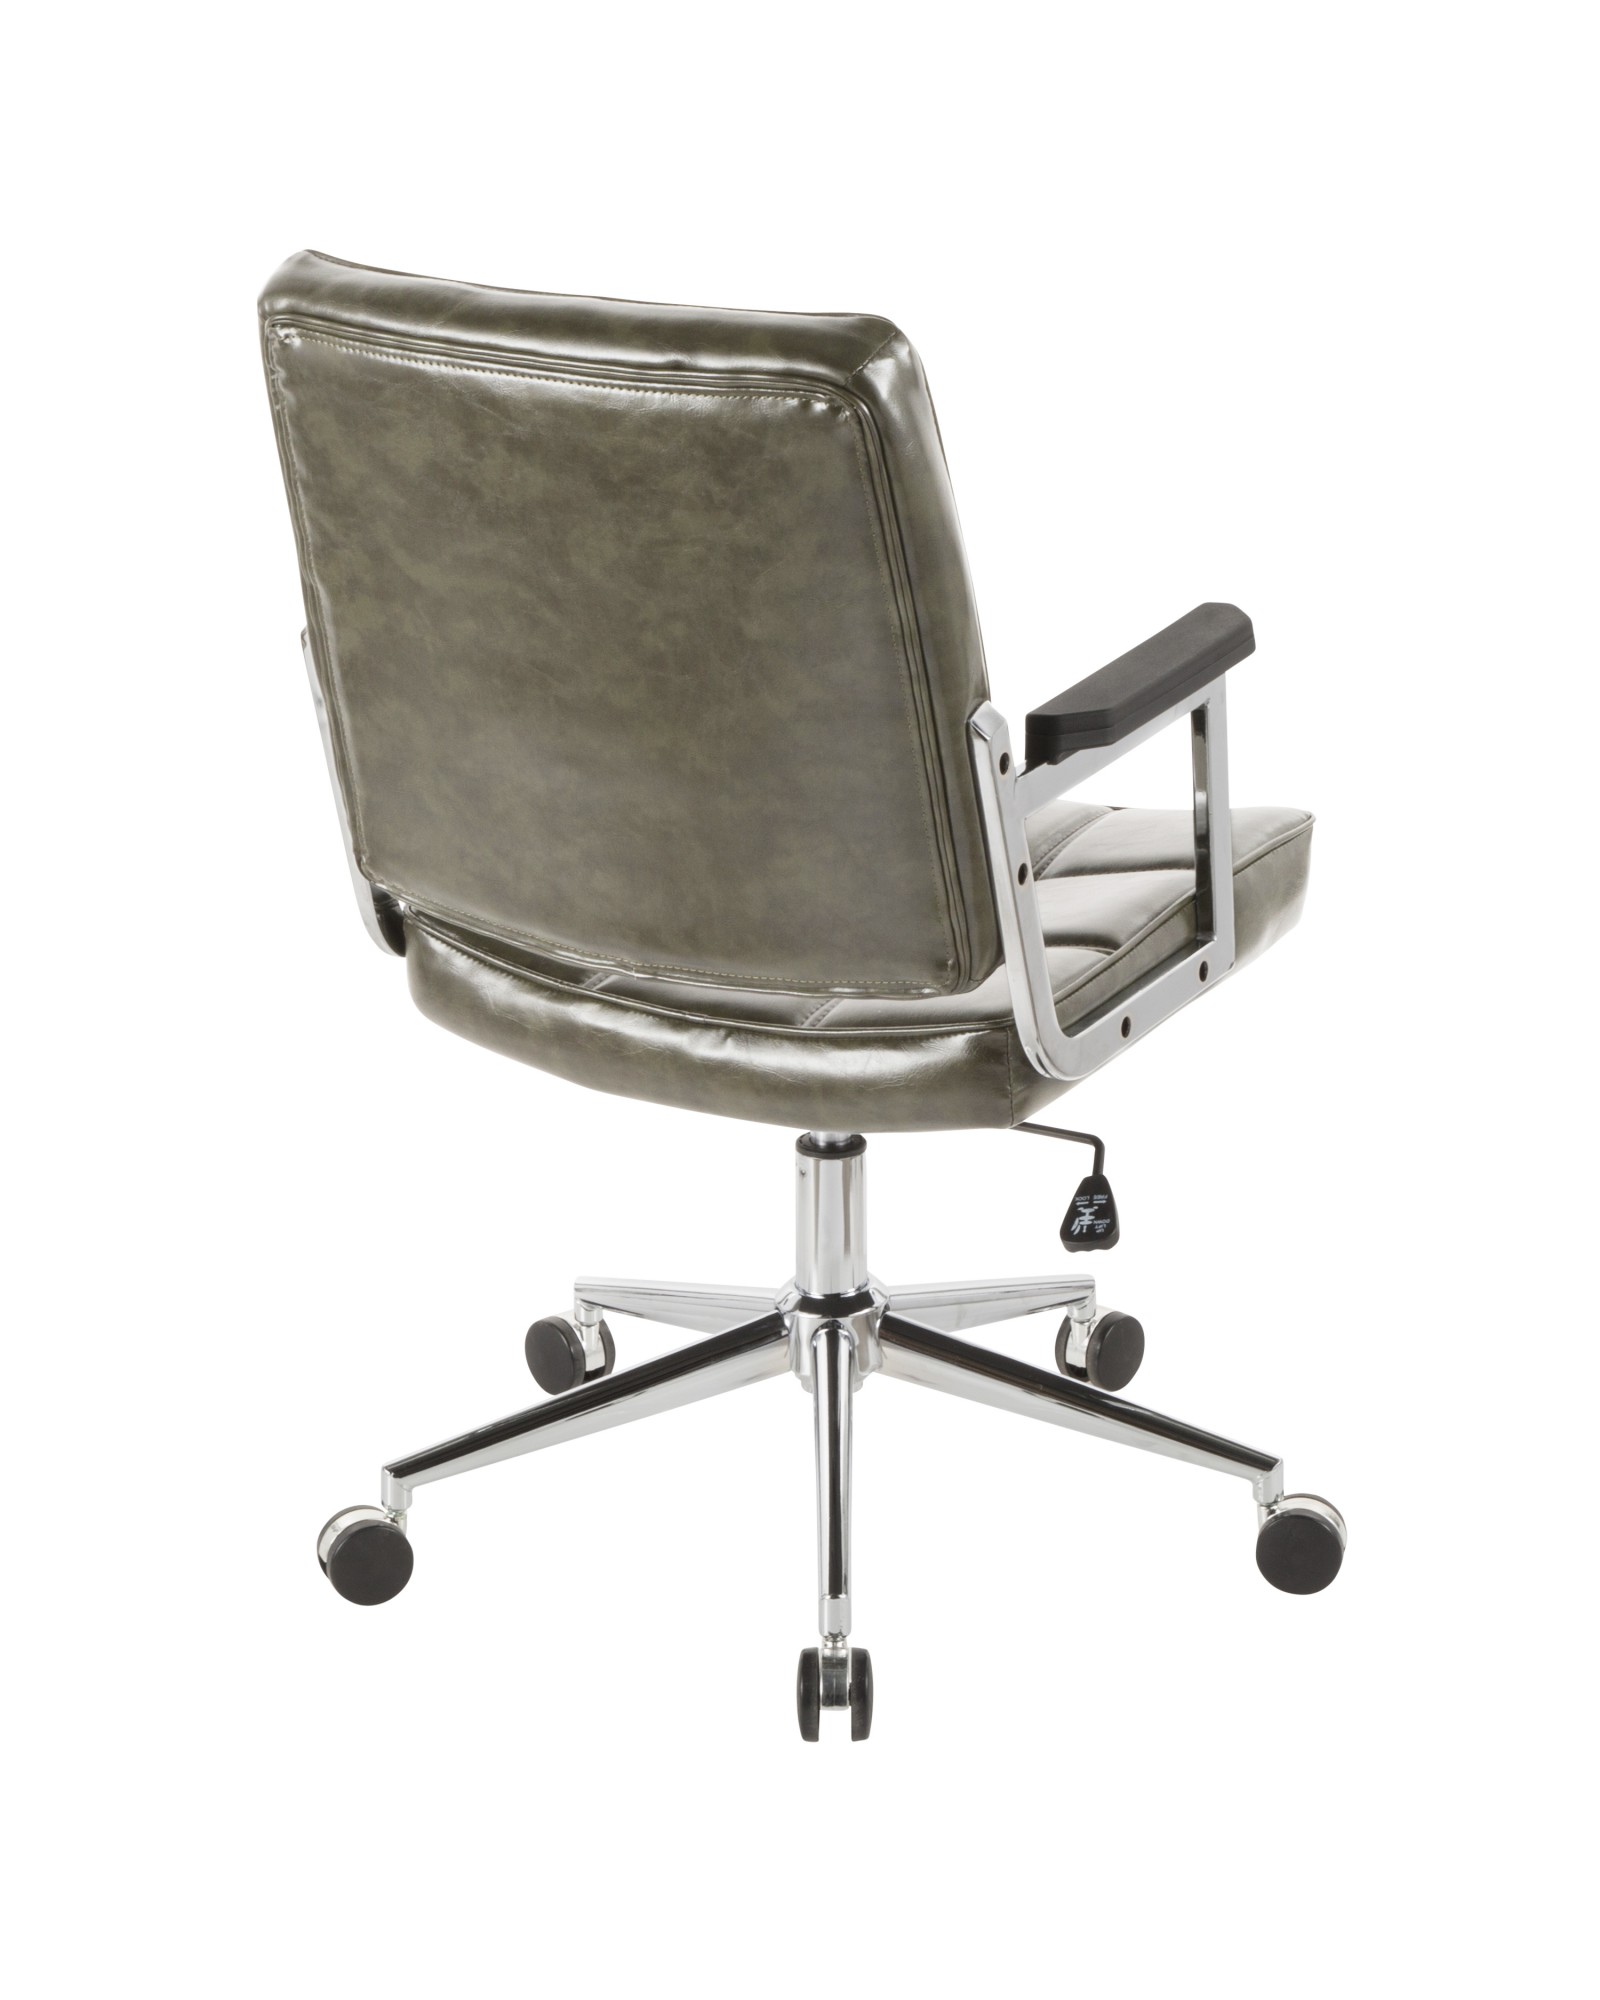 Bureau Contemporary Office Chair with Chrome Metal and Green Faux Leather